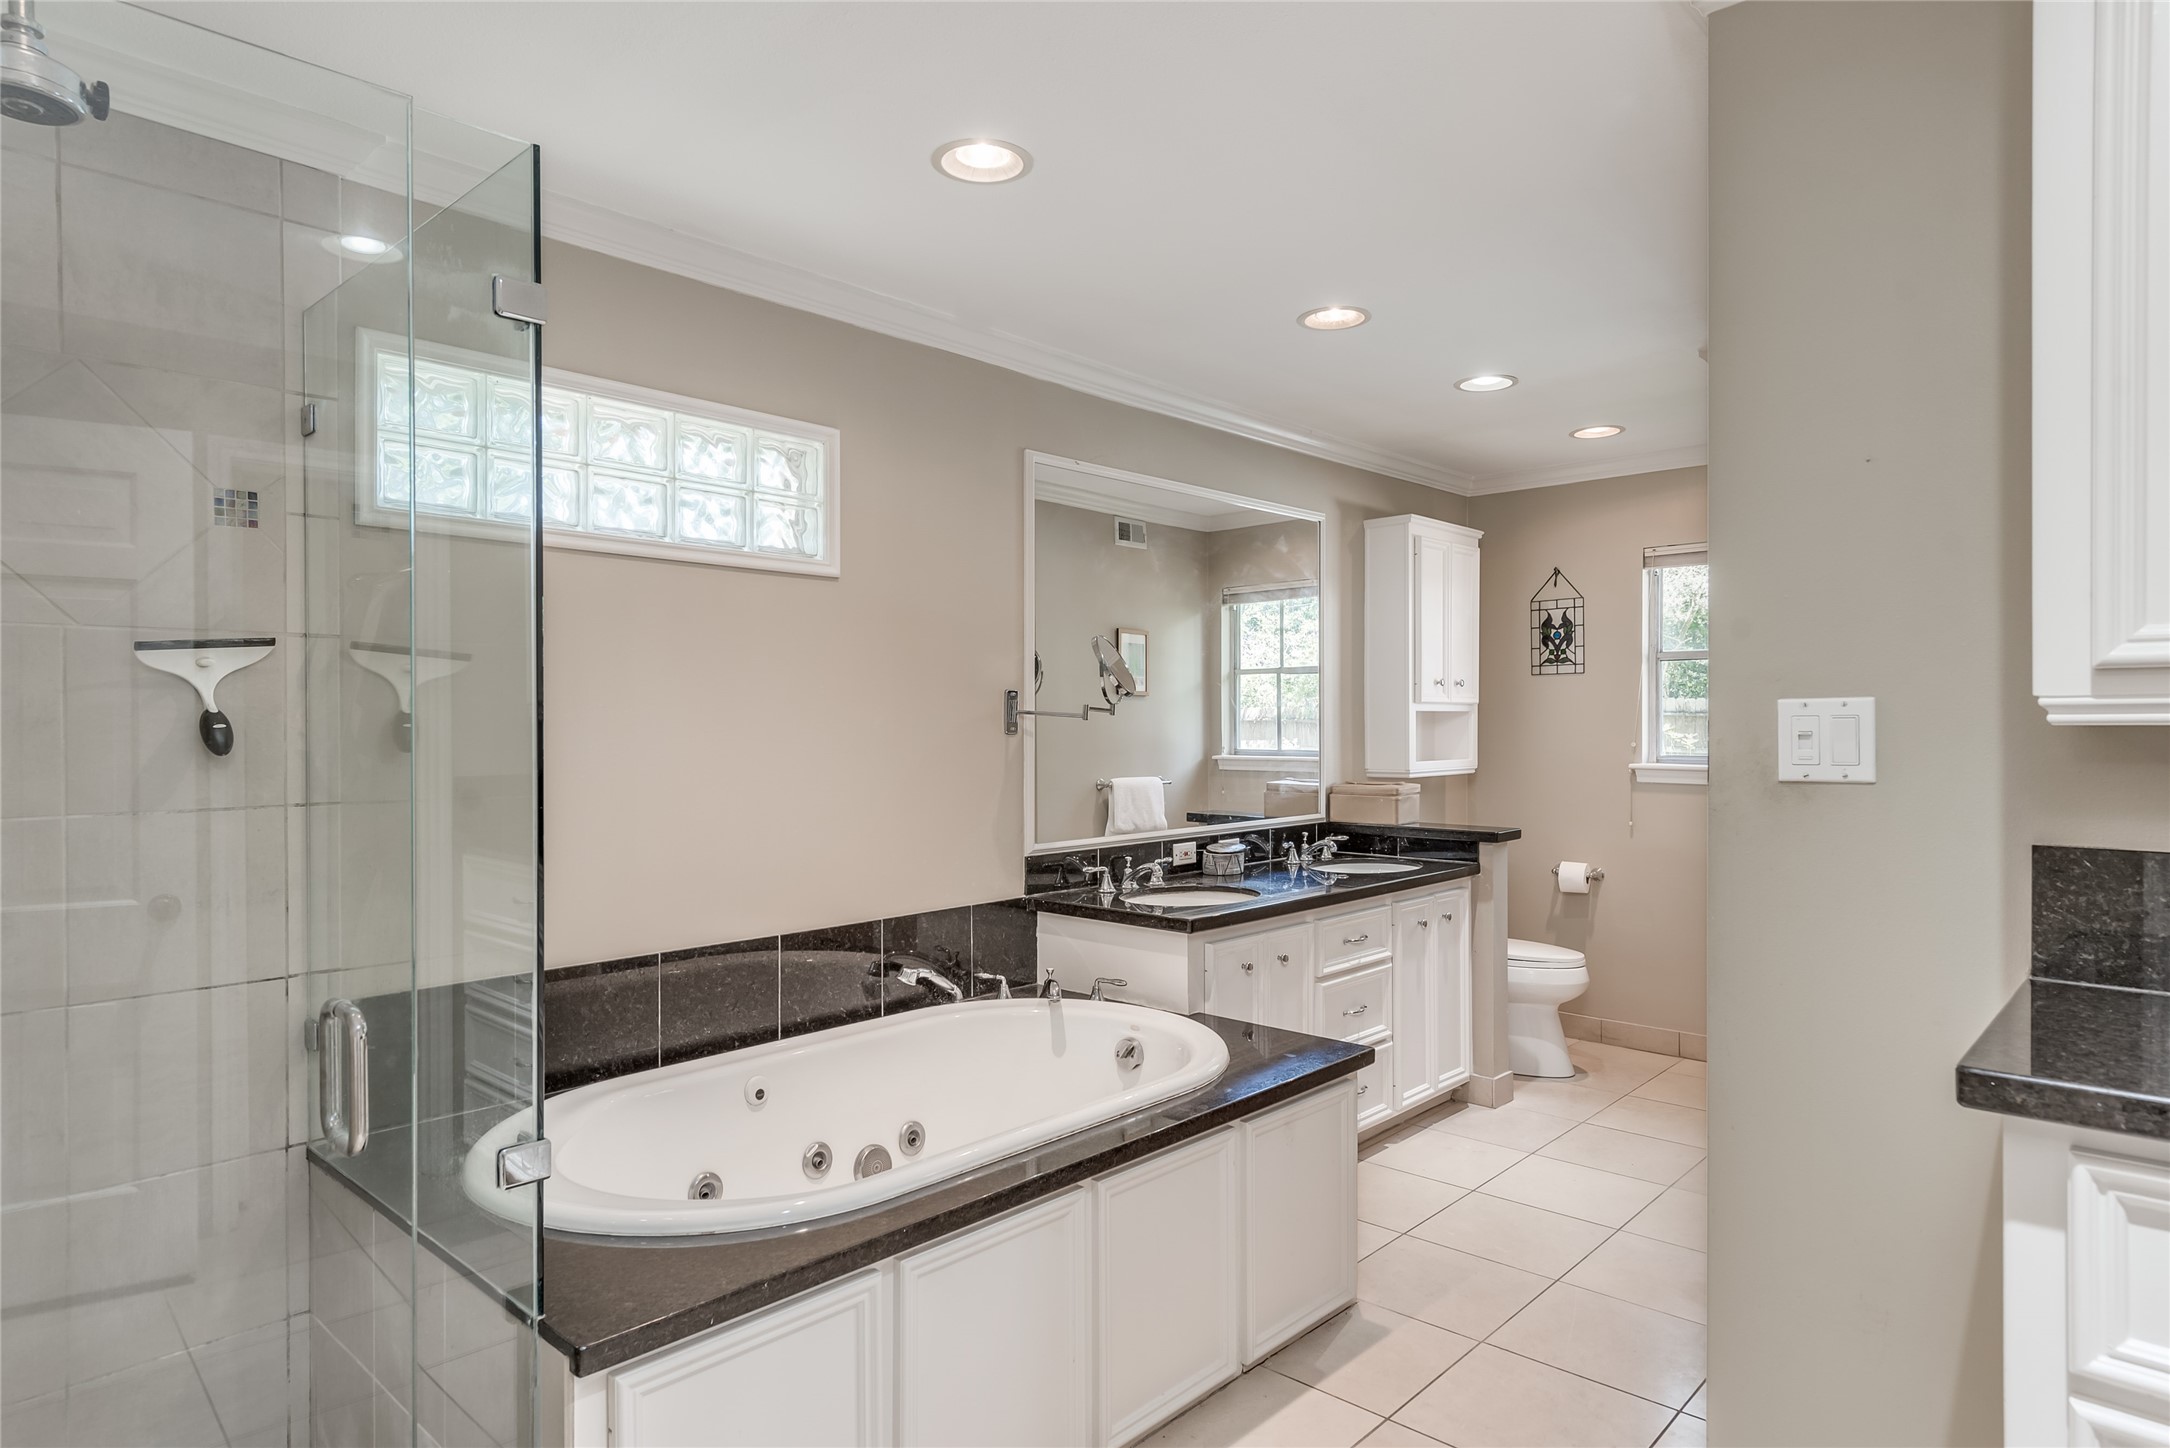 Primary bathroom with jet tub, walk-in shower and double sinks.